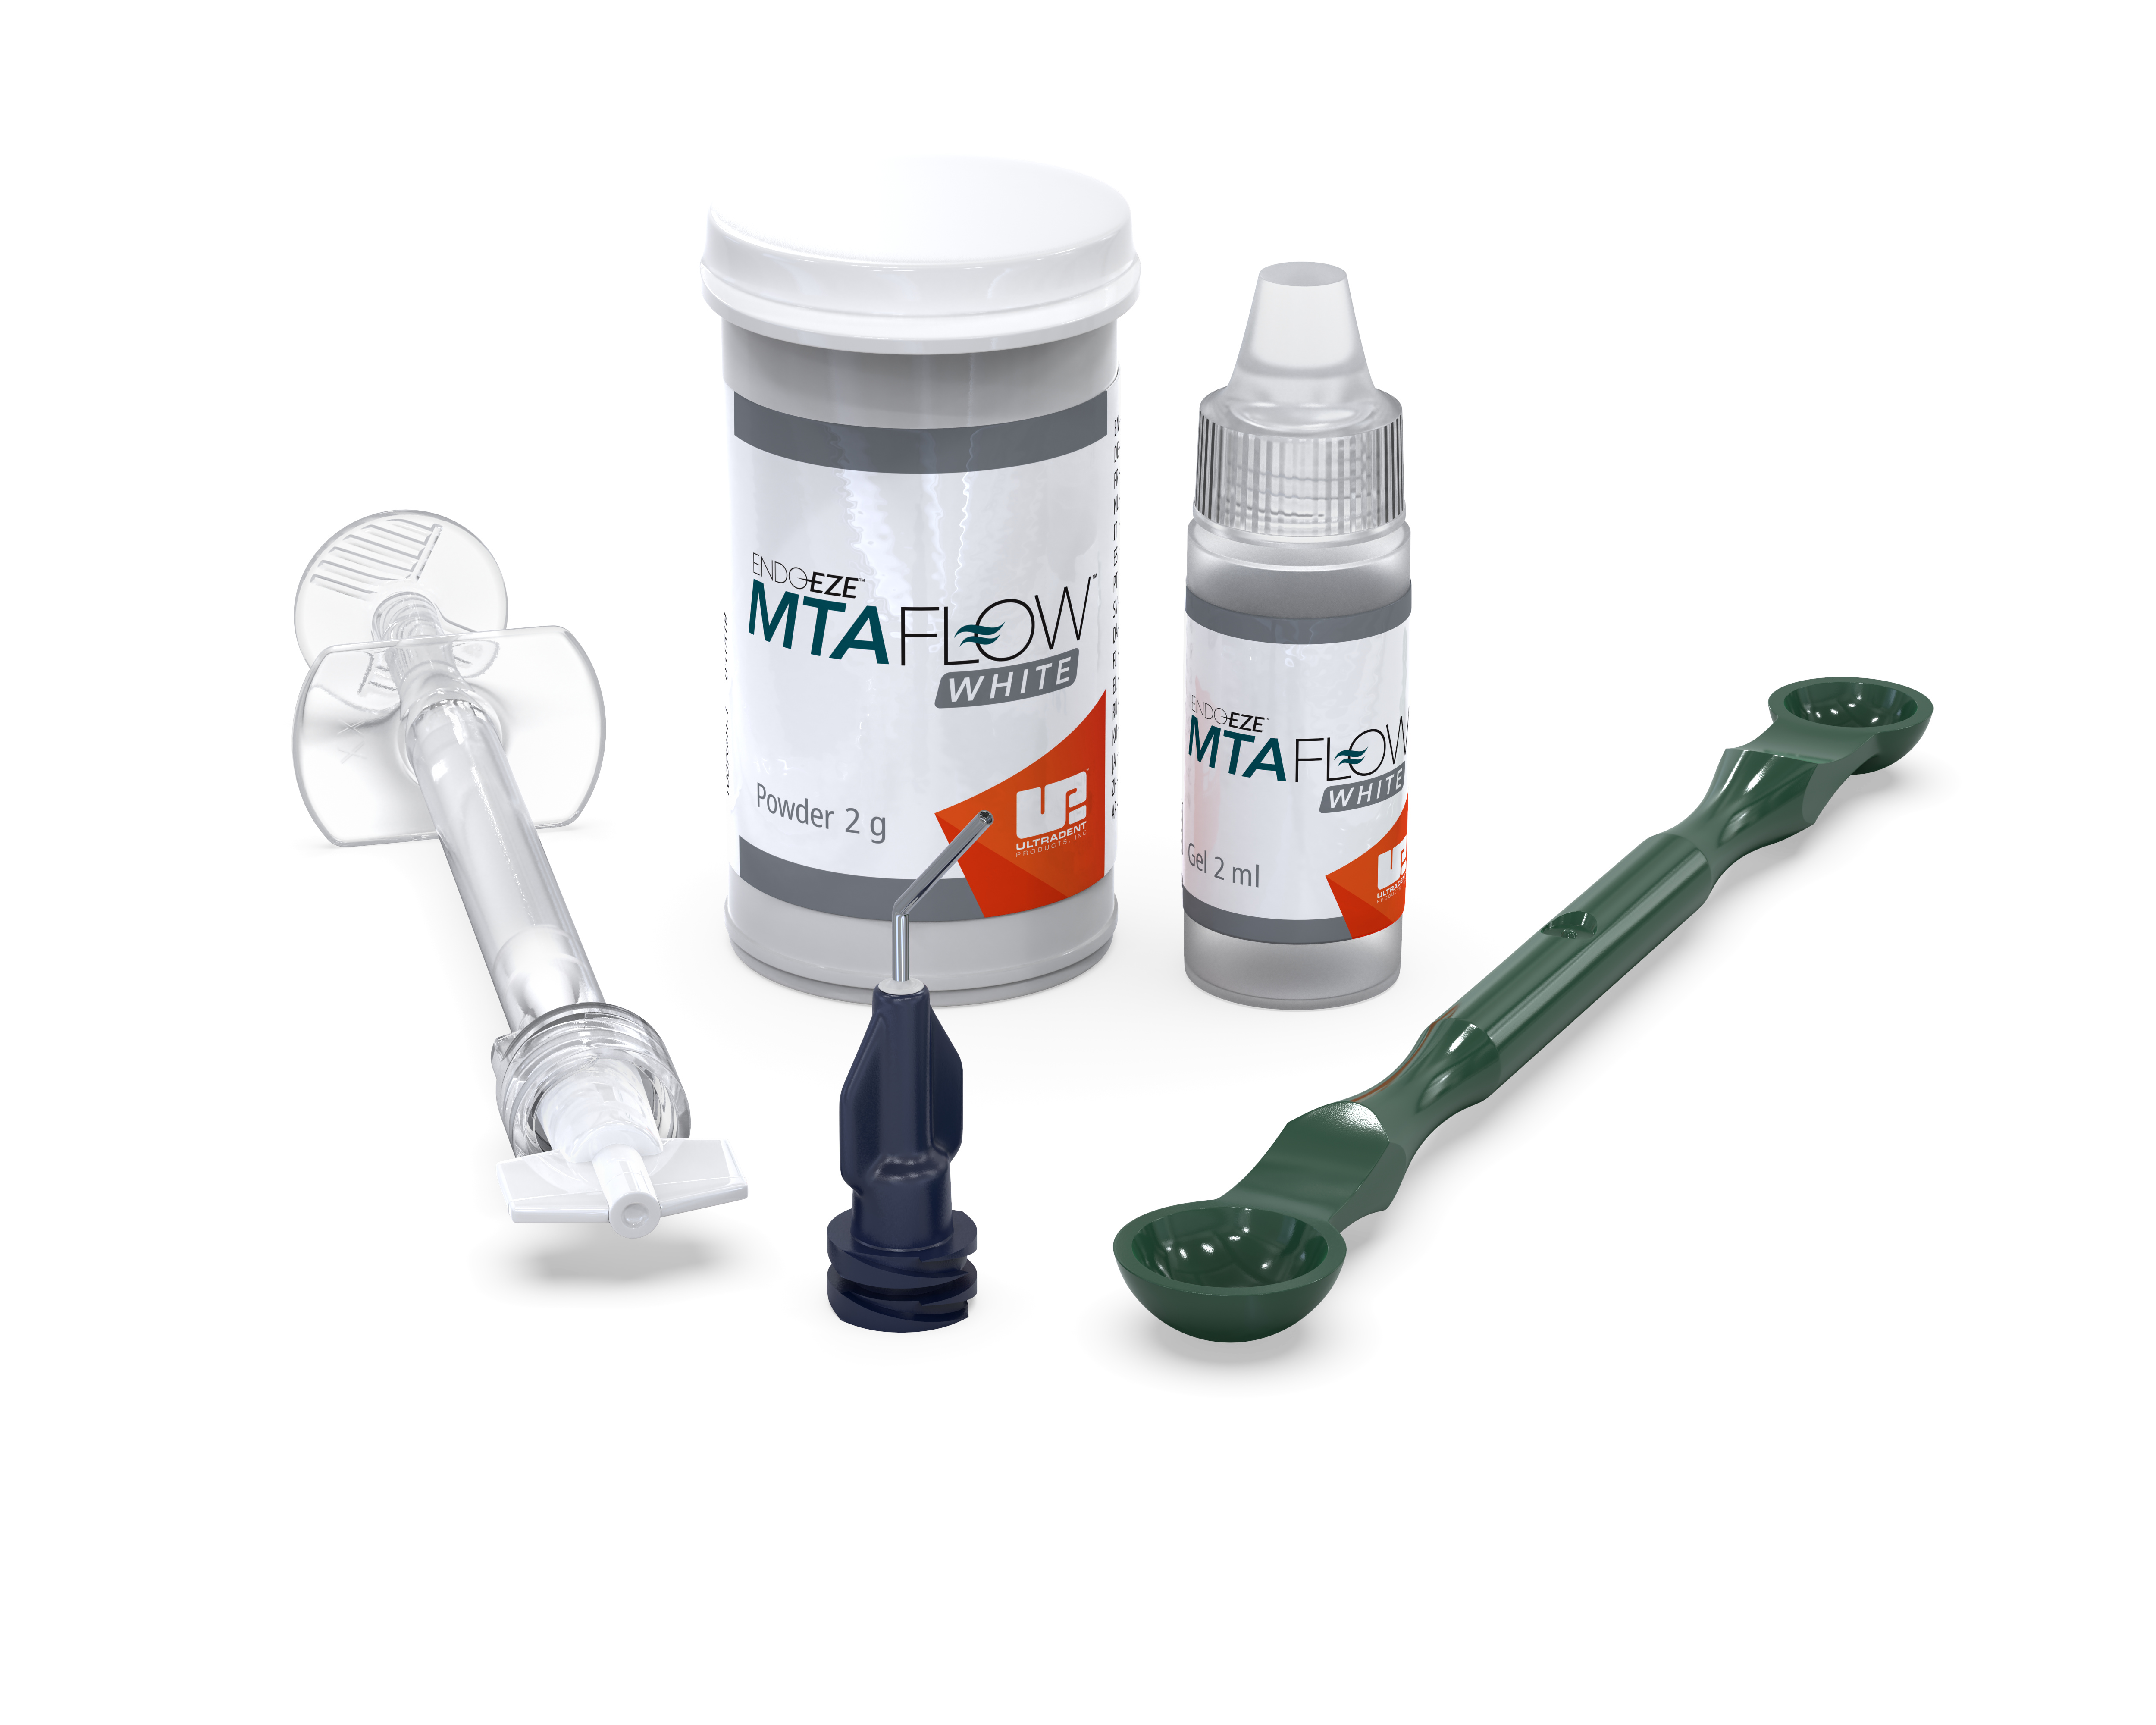 MTAFlow White, Full kit content with no pad, 3D image